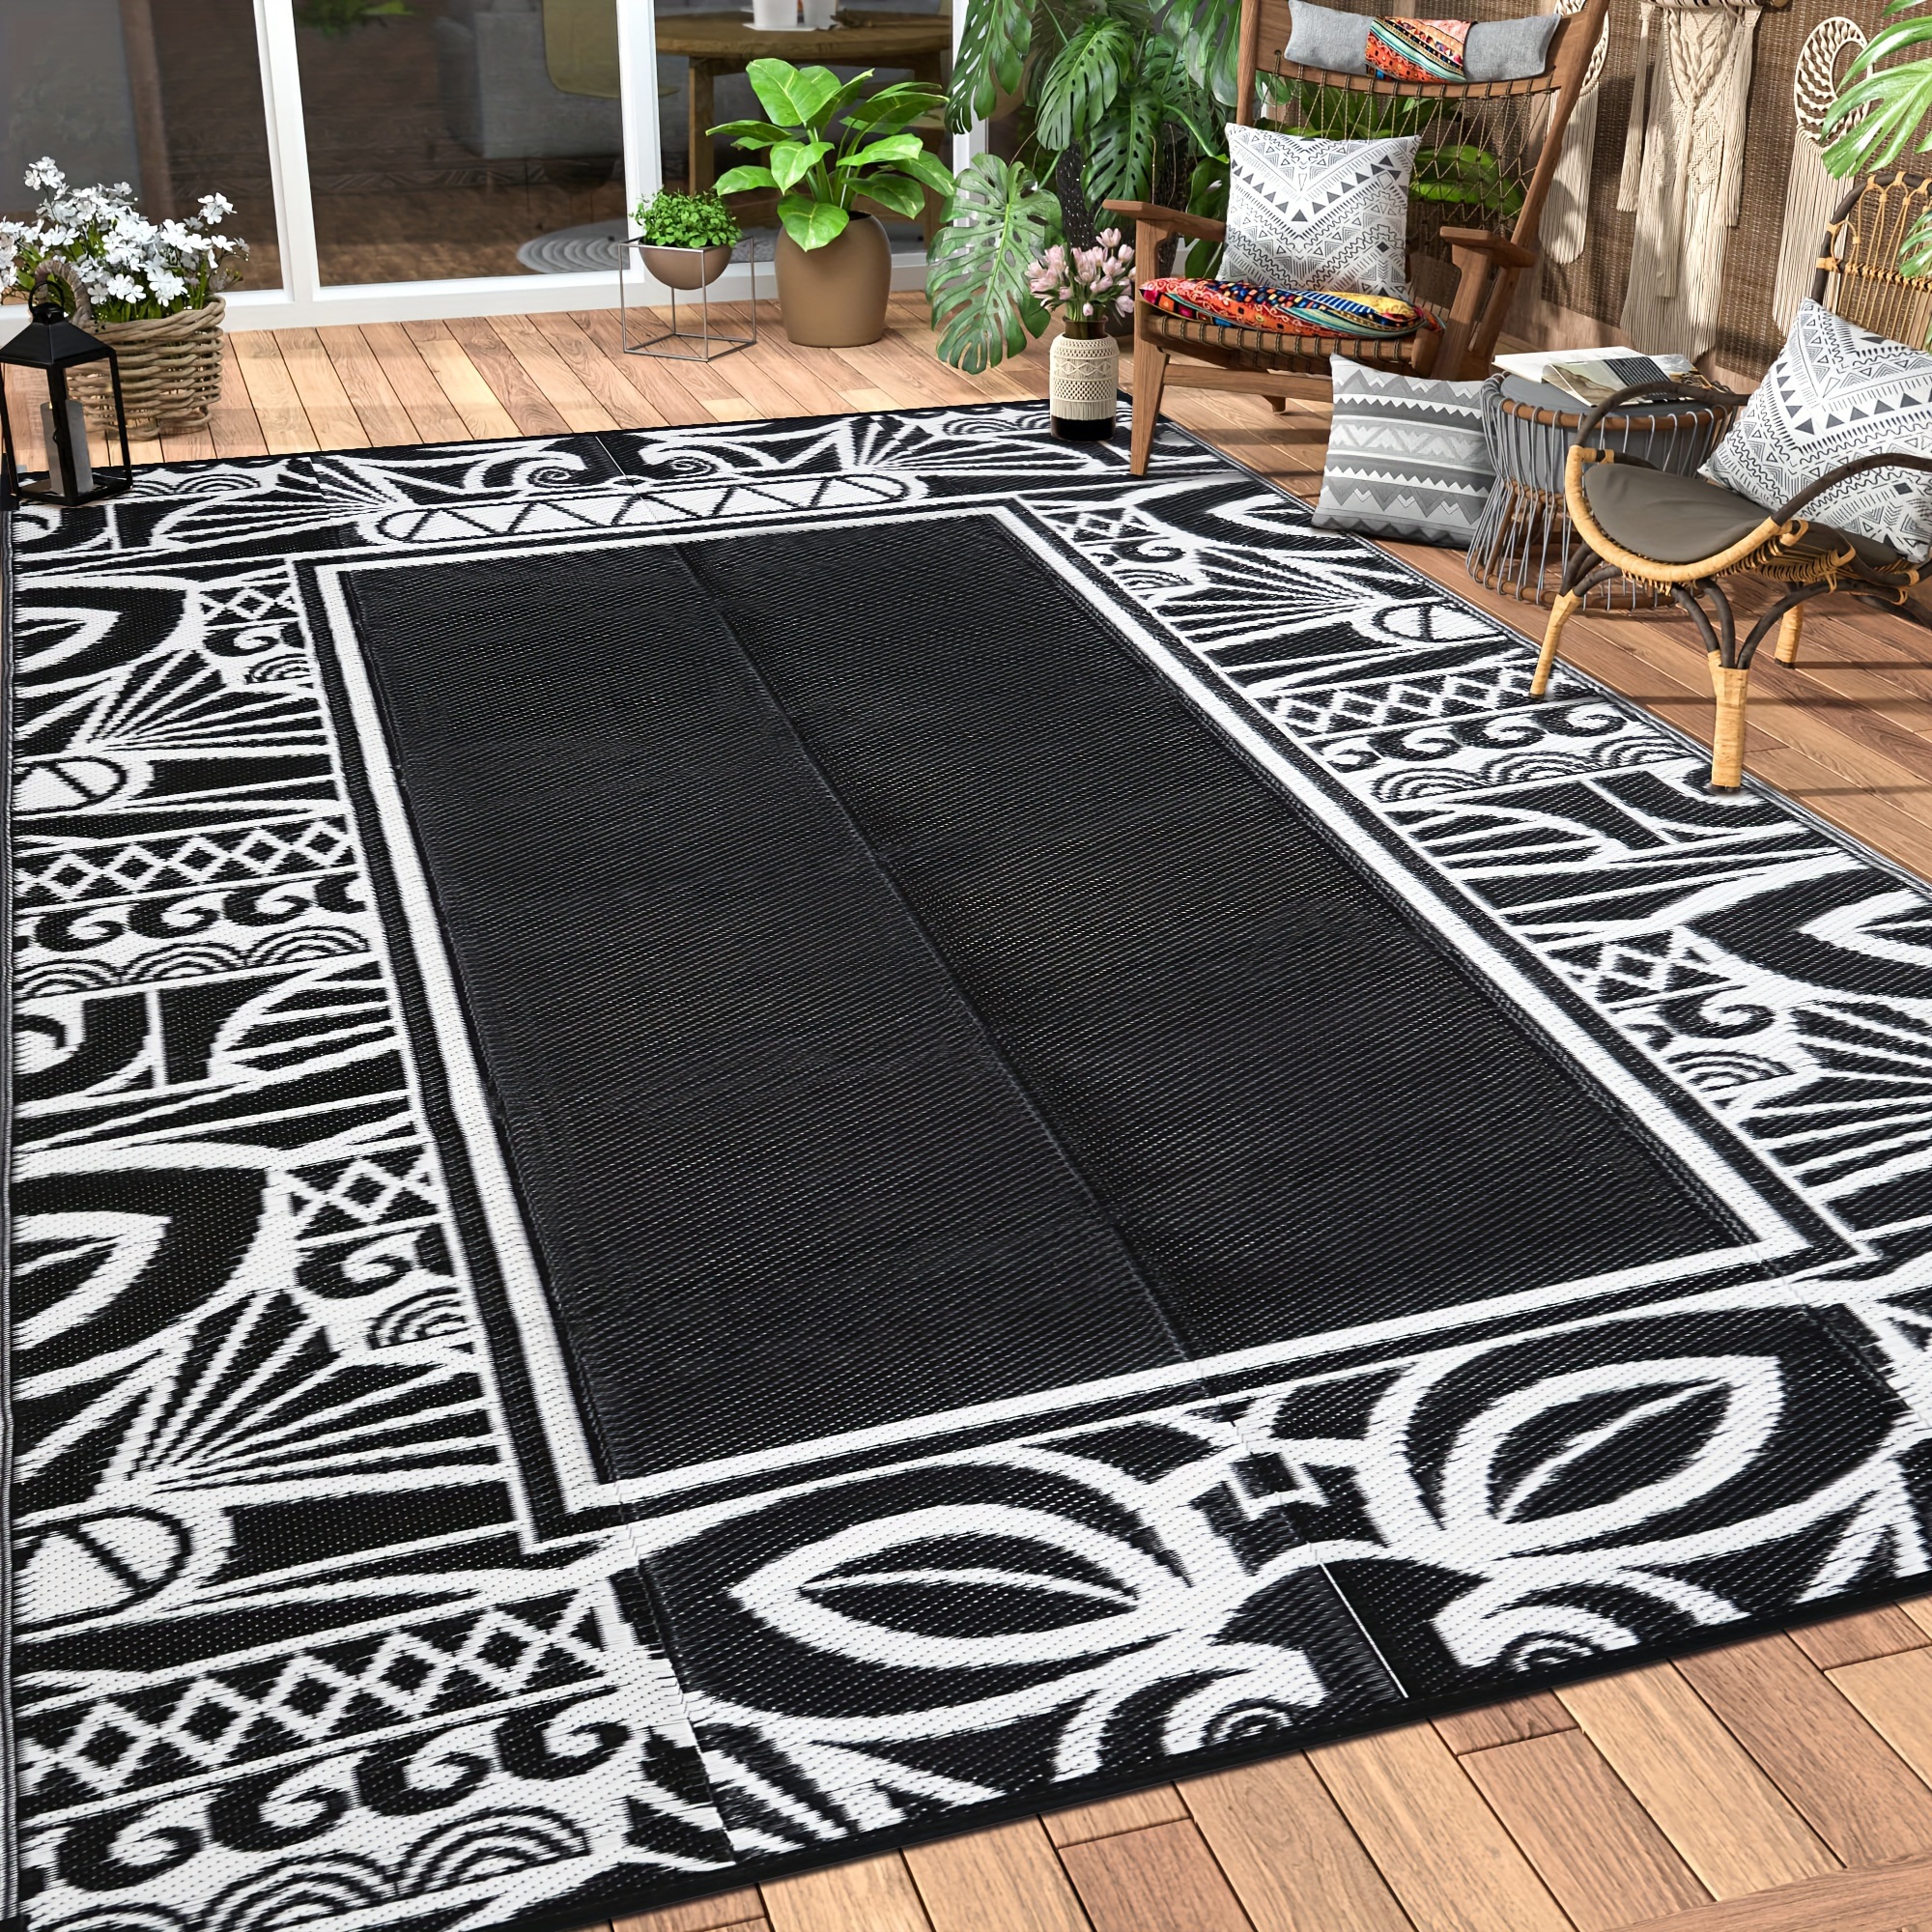 

1pc, Tribal Paisley Pattern Woven Waterproof Outdoor Rug, 6 X 9 Ft Resistant Patio Mat With Uv Protection, Versatile Decoration For Home & Garden Deck Area